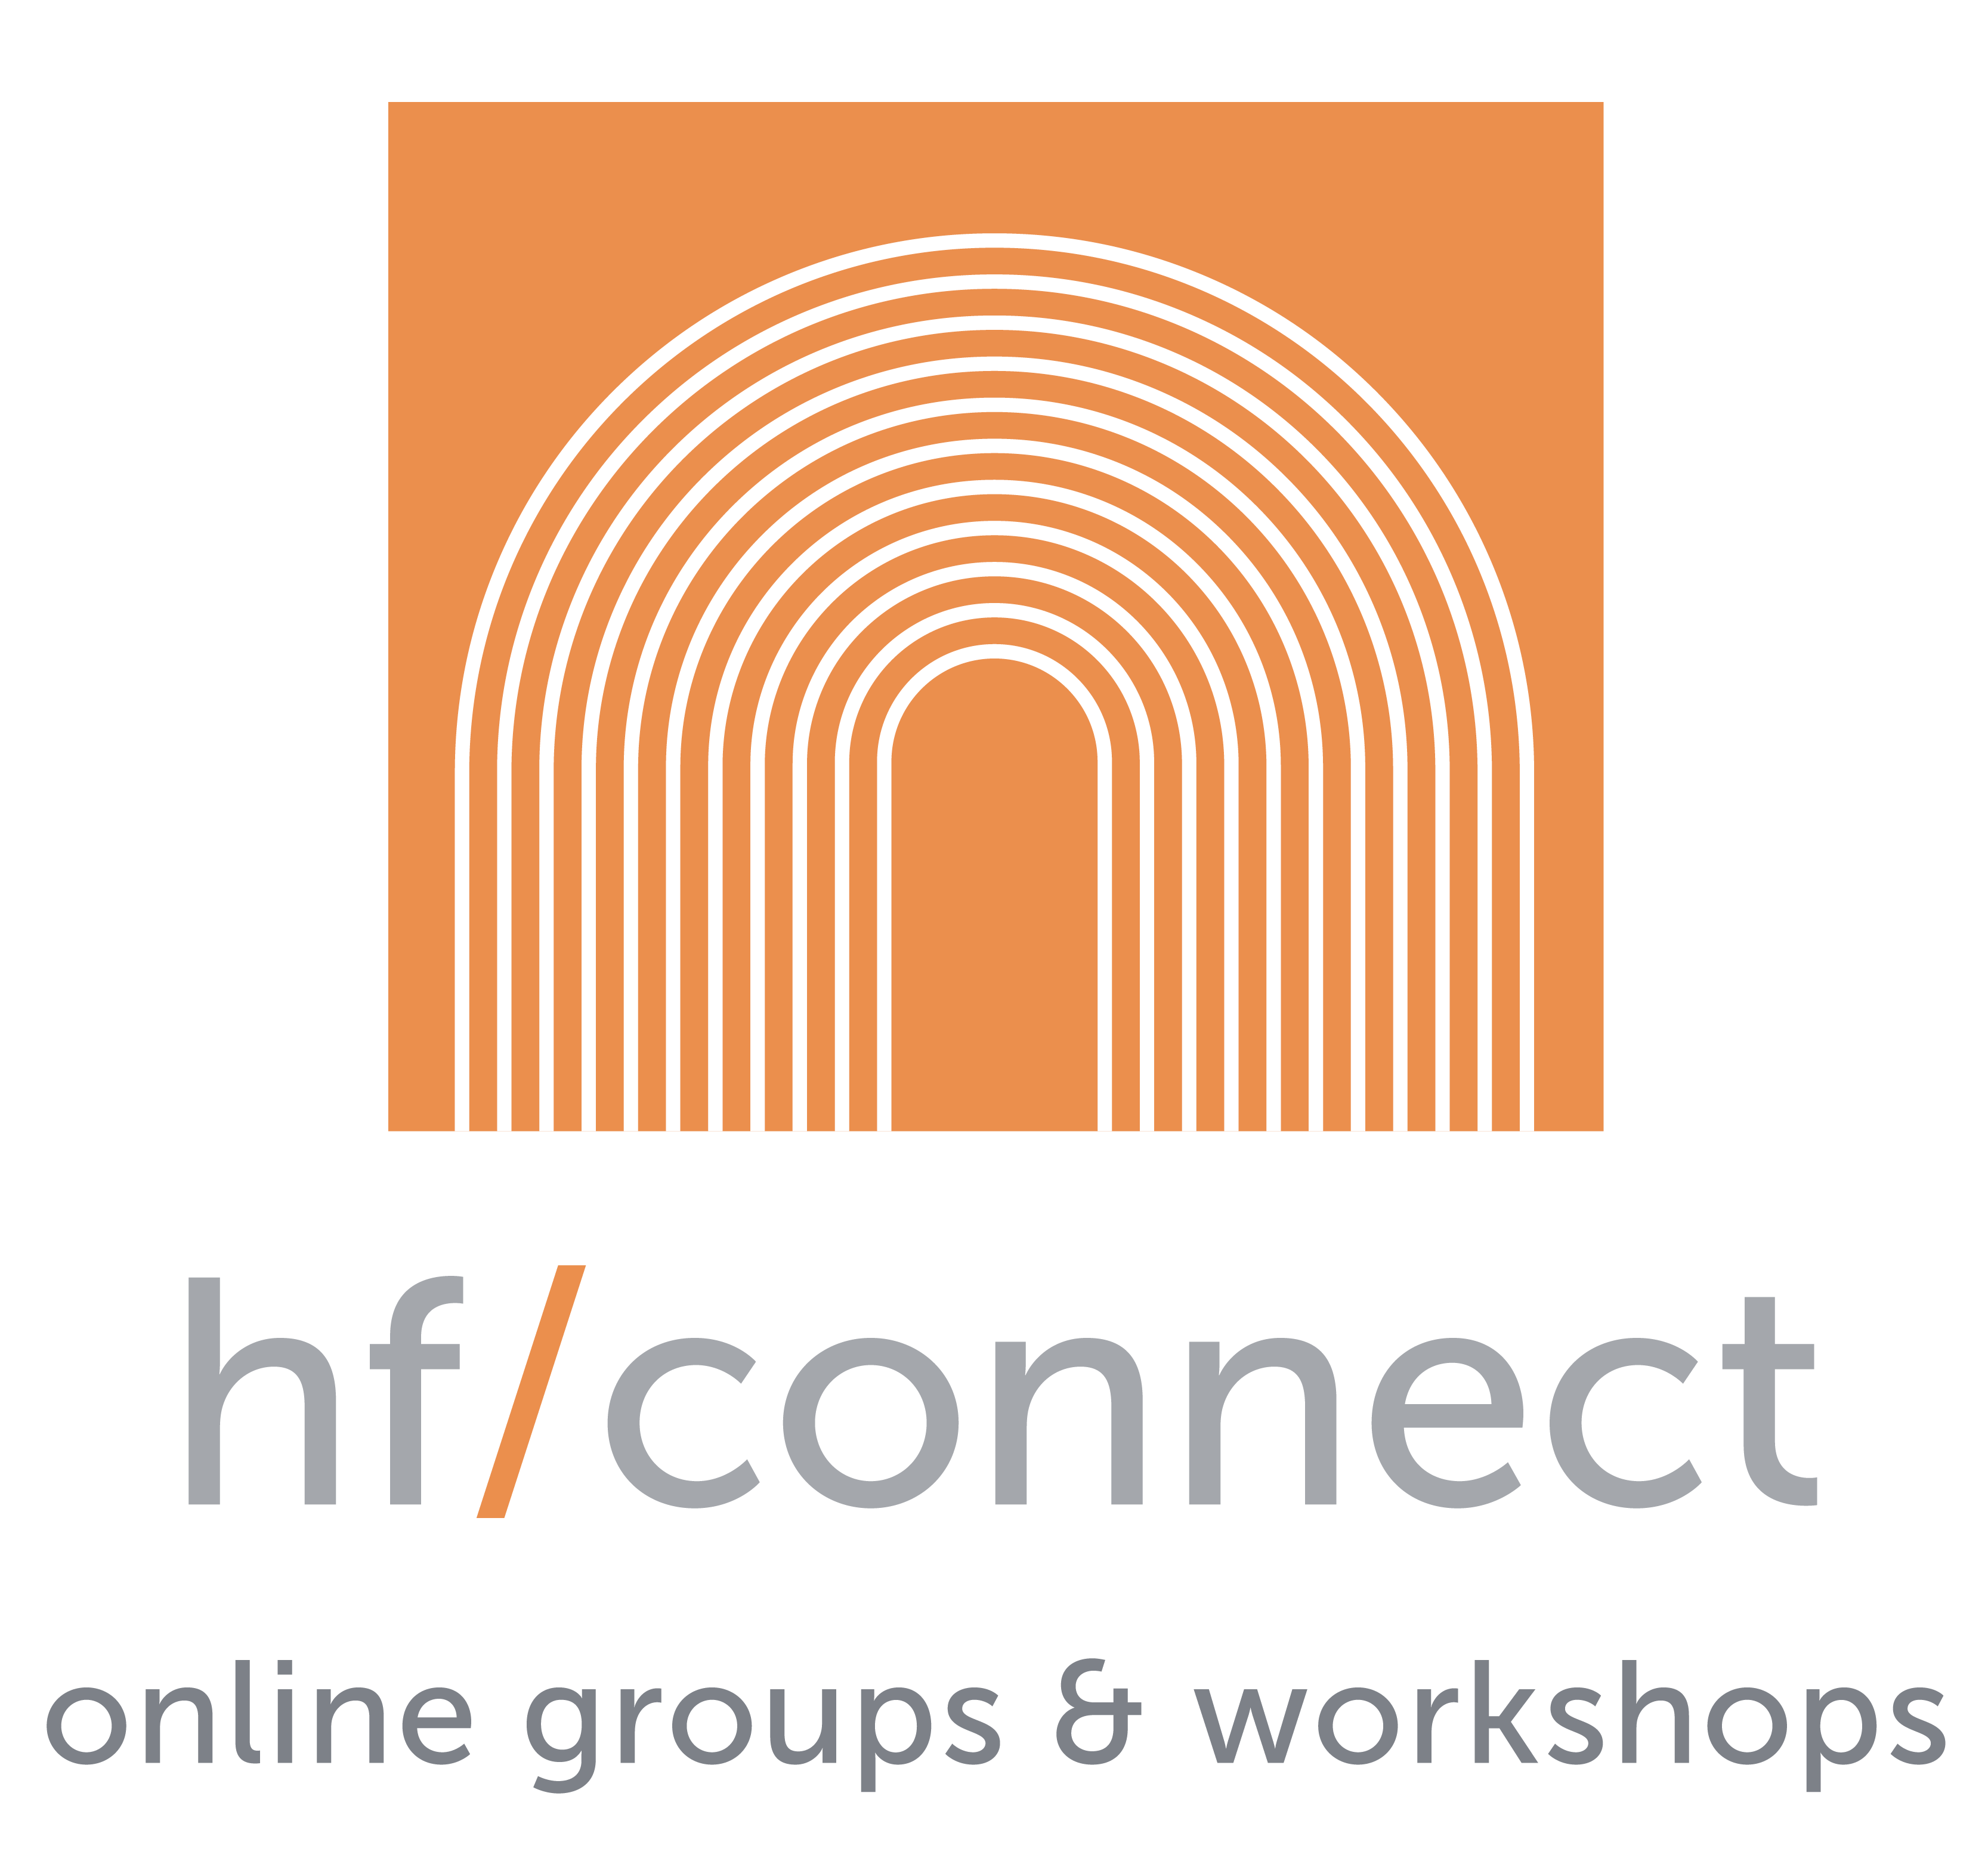 A banner with the HF connect logo and text reading "HF/Connect - Online Groups & Workshops"